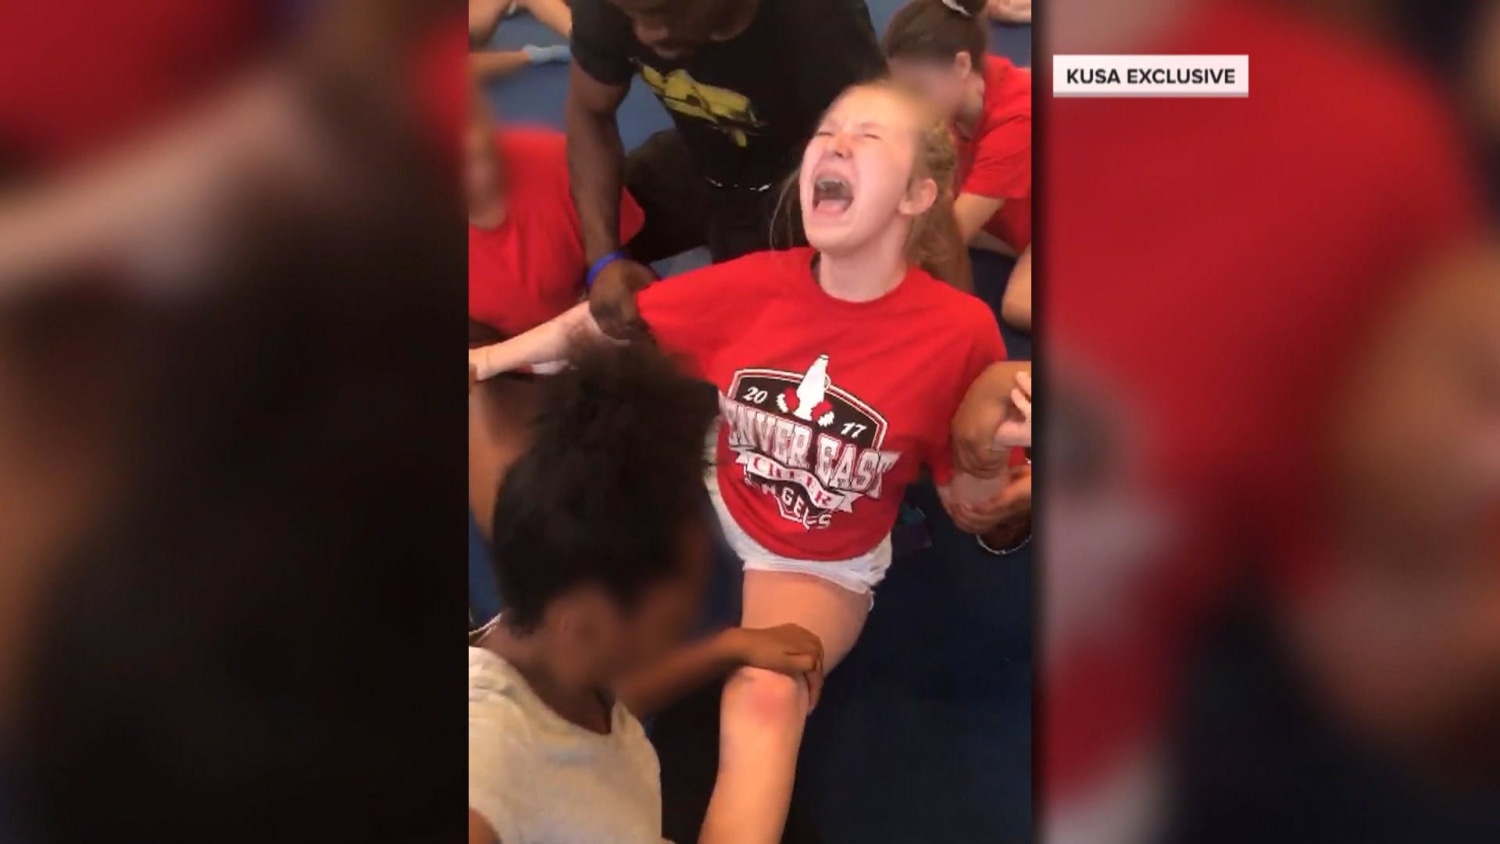 Disturbing video shows high school cheerleaders forced into repeated splits photo pic image